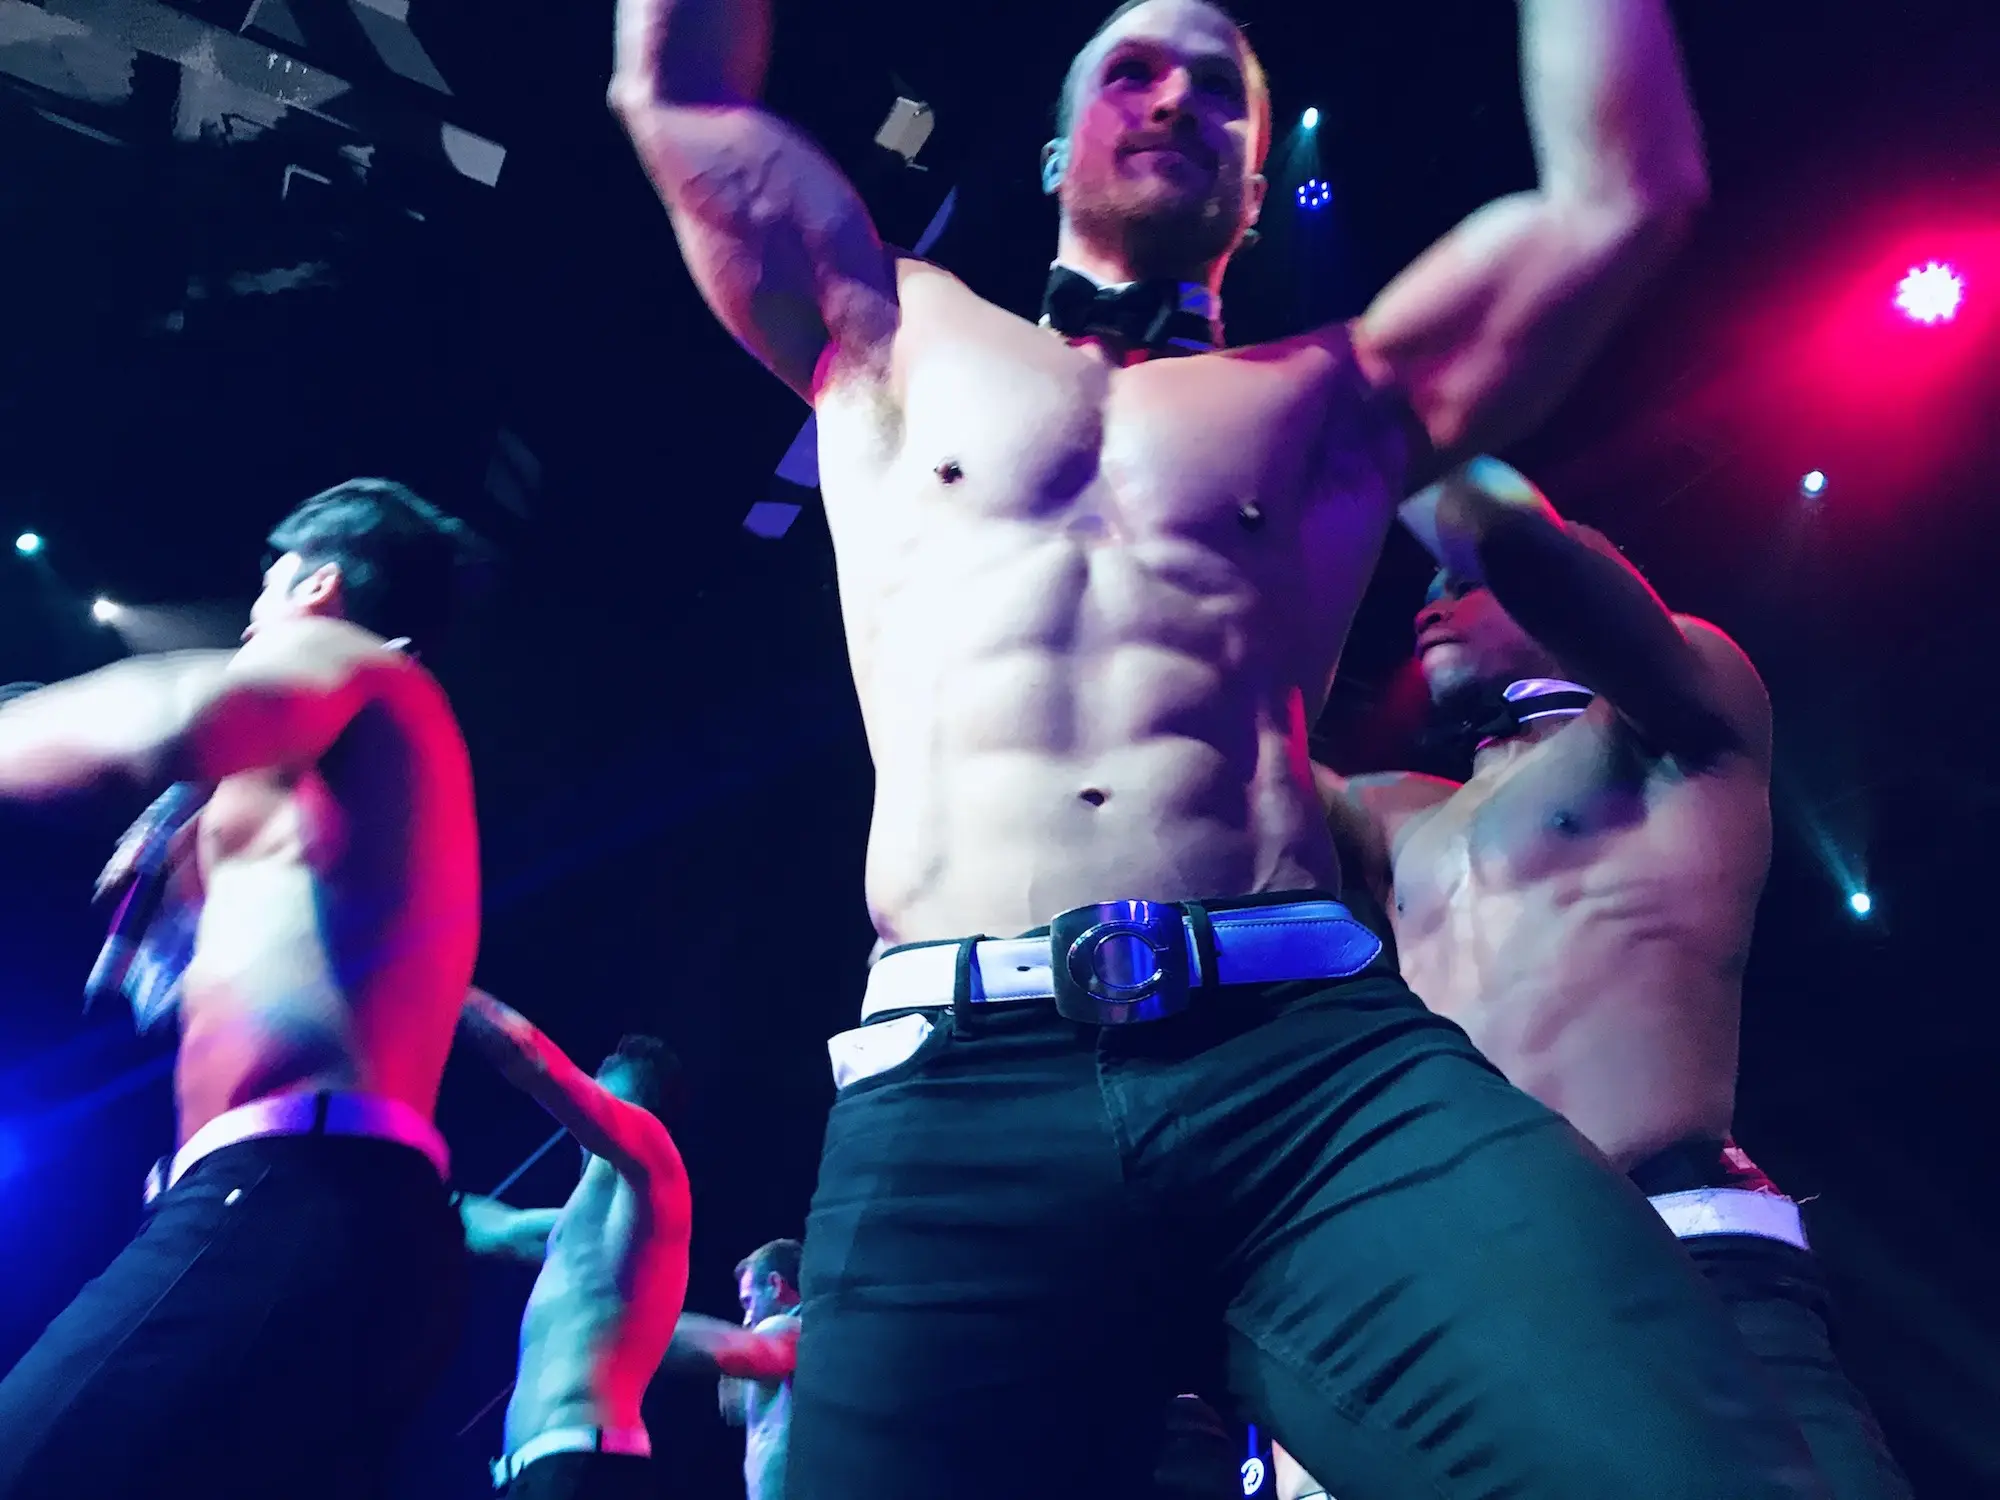 Do Chippendales Take It All Off? A Guide To The Best Gay-Friendly Male Strip Show in Vegas 😍